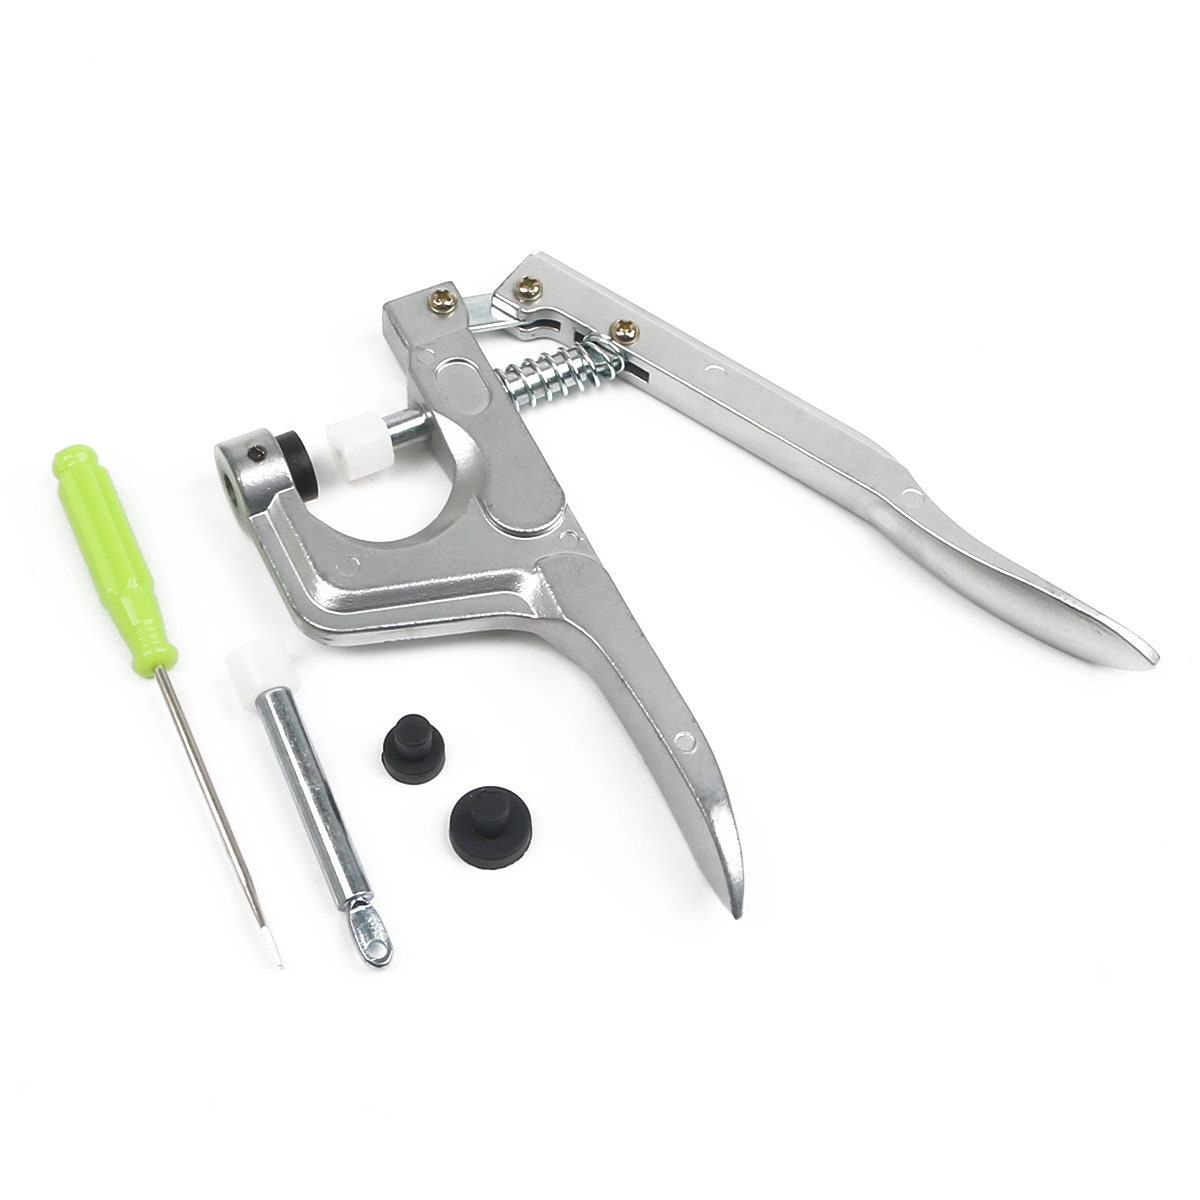 Plastic Snap Buttons Tool - Pliers For Size 16, 20 & 22 Snaps